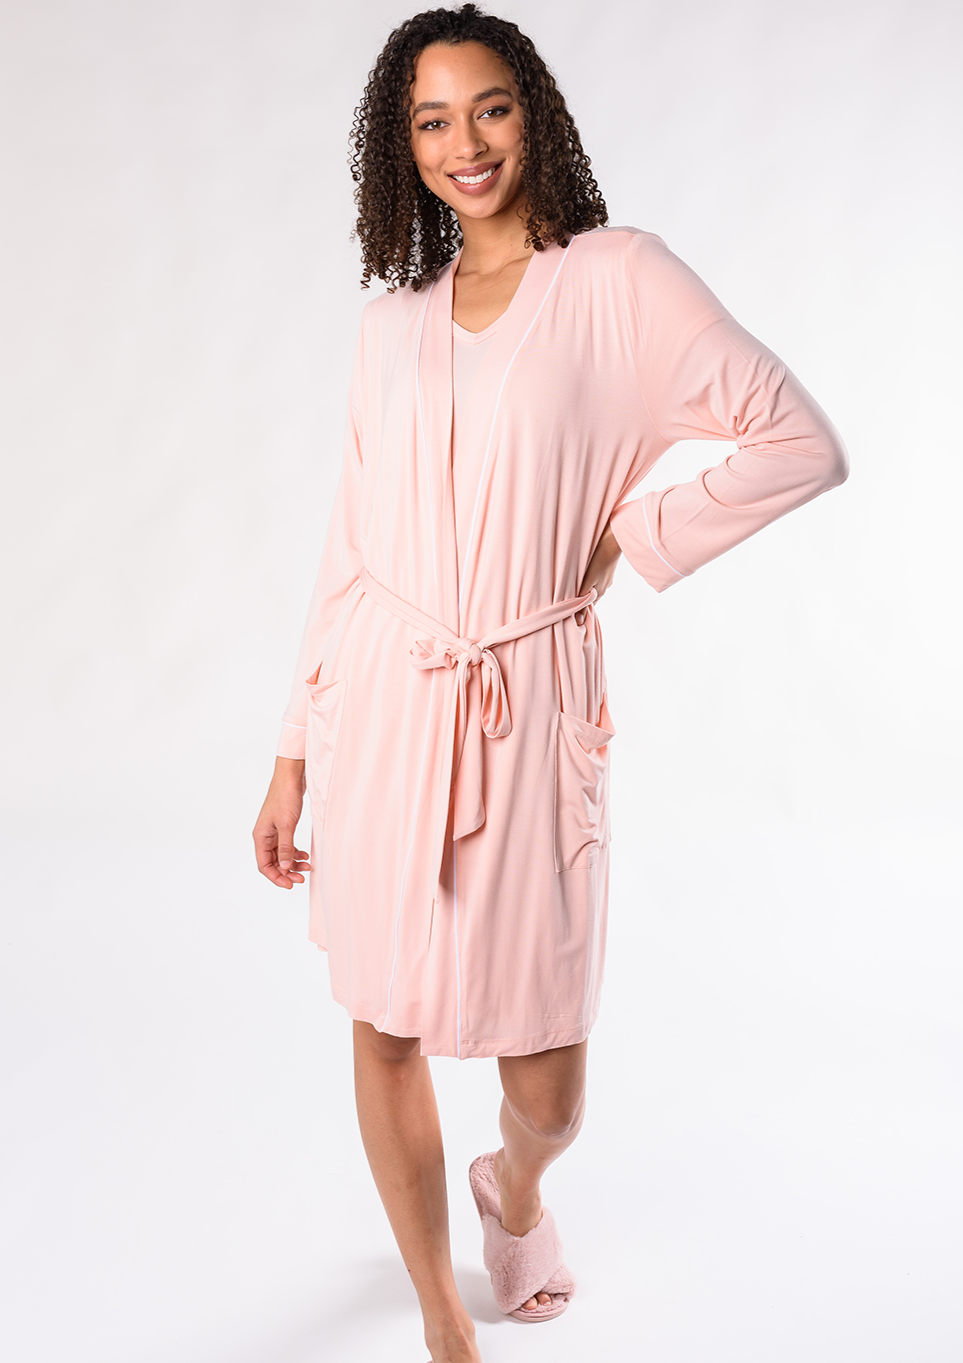 You deserve the Mia Luxe Robe to lounge in. Made with signature soft viscose from bamboo, this robe feels cooling and smooth on the body. You’ll love the side pockets, elegant white piping and self belt. Perfect as a gift! Fabrication: 95% Viscose from Bamboo 5% Spandex TERRERA Light Pink $95.00